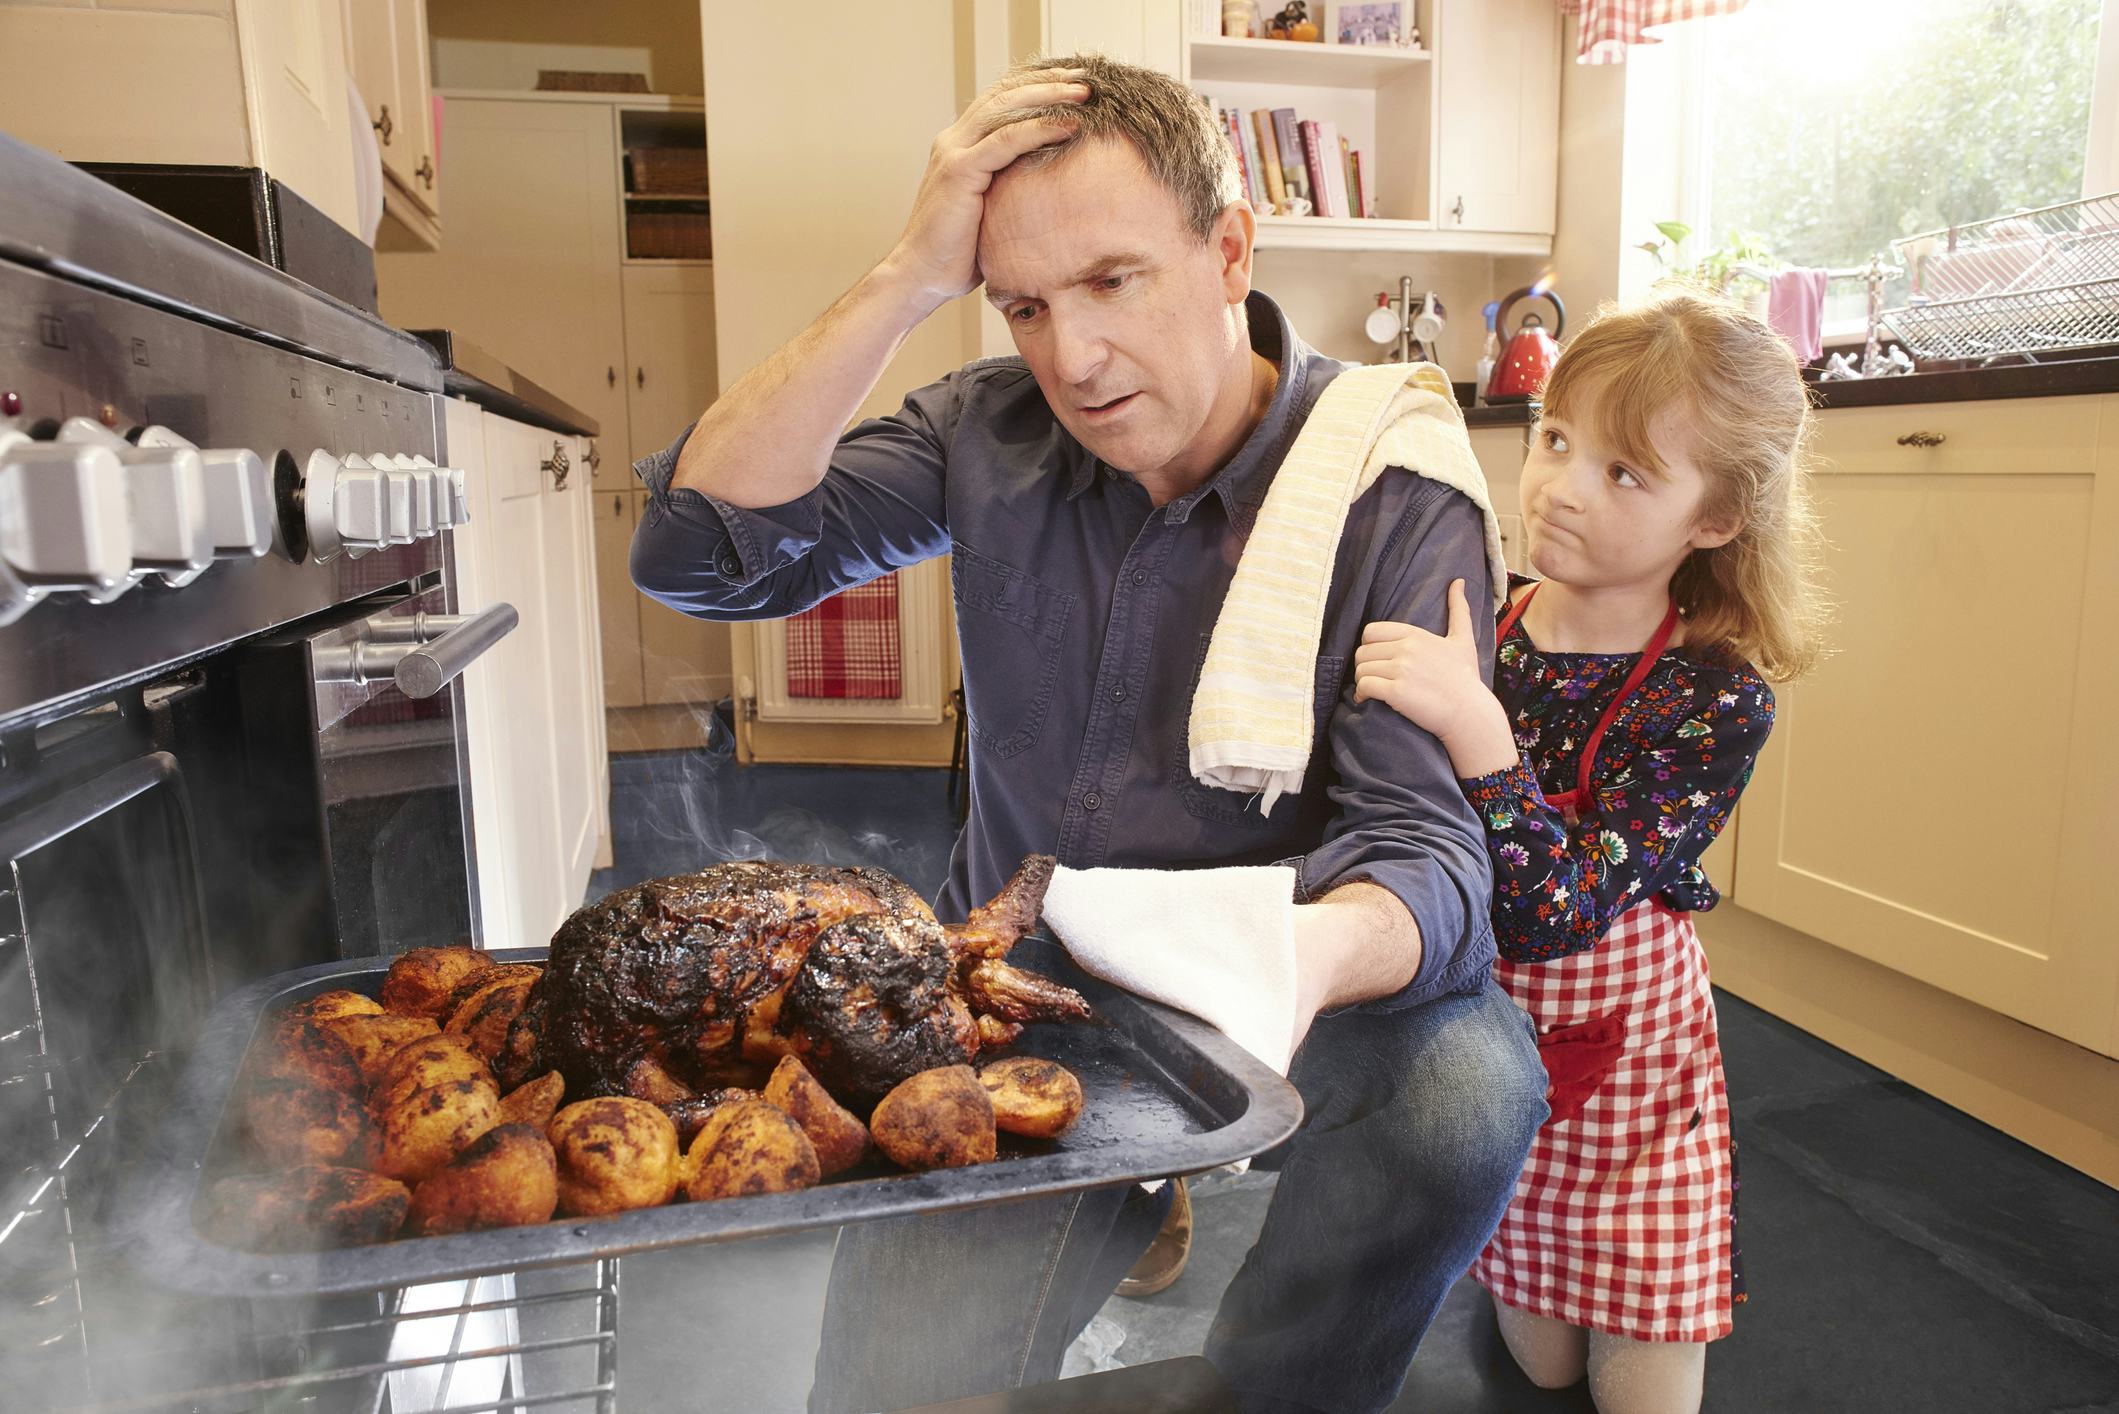 A father pulls a burnt turkey out of the oven and his little daughter consoles him.